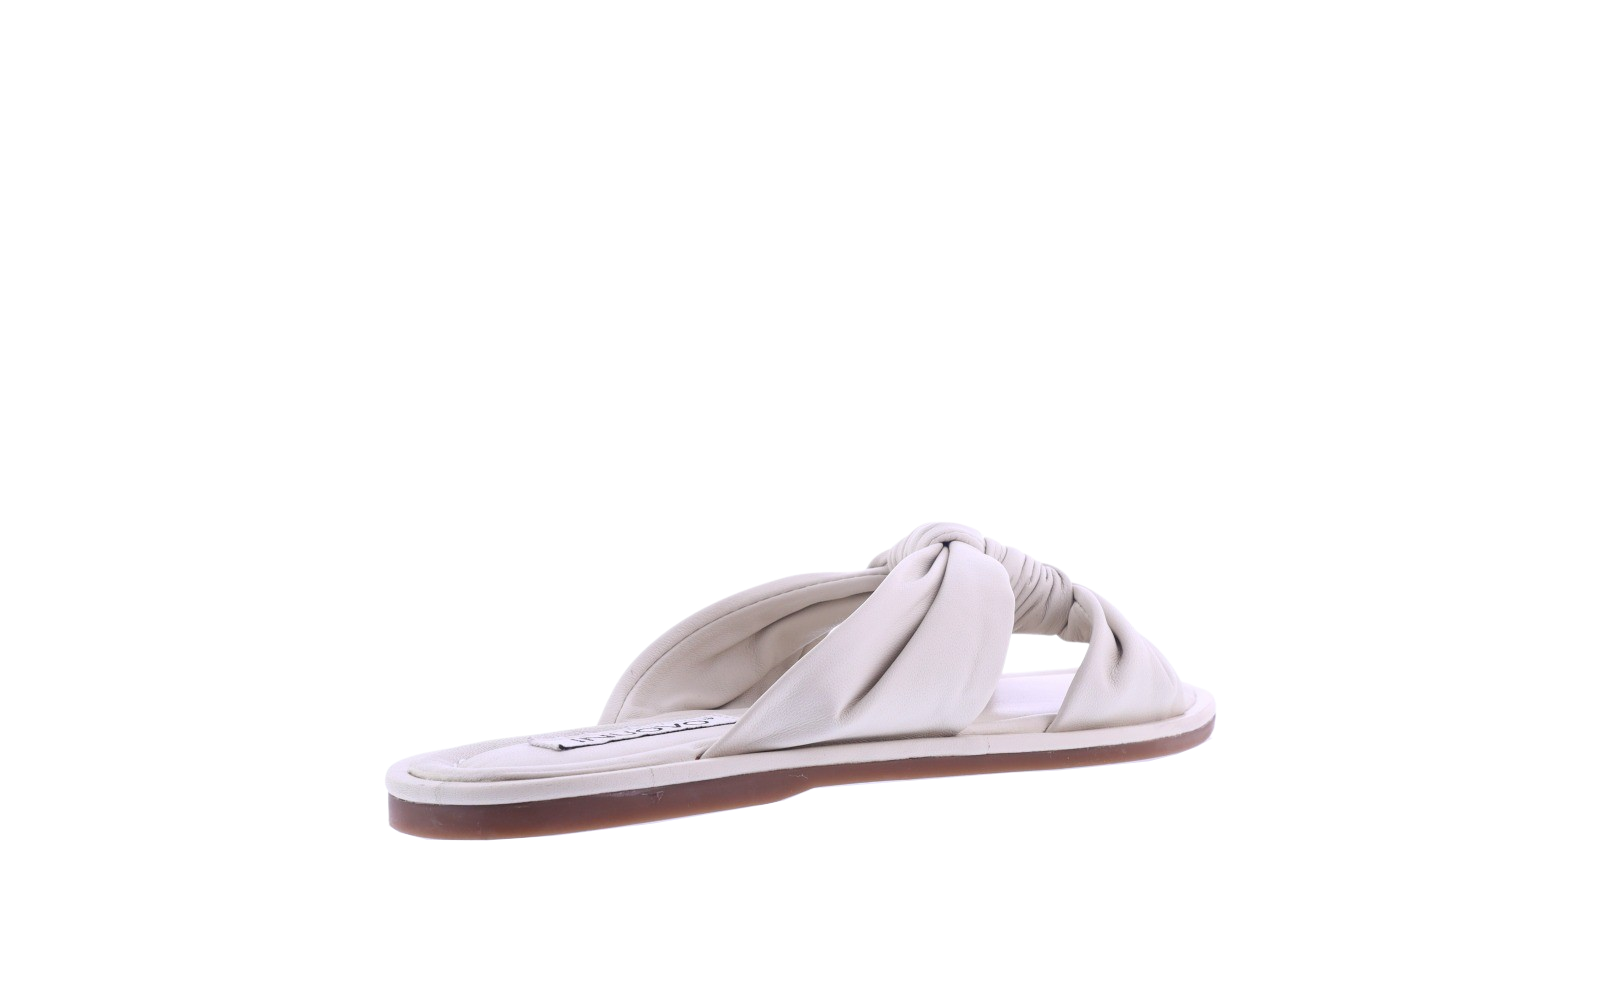 Women Inuovo Sandals